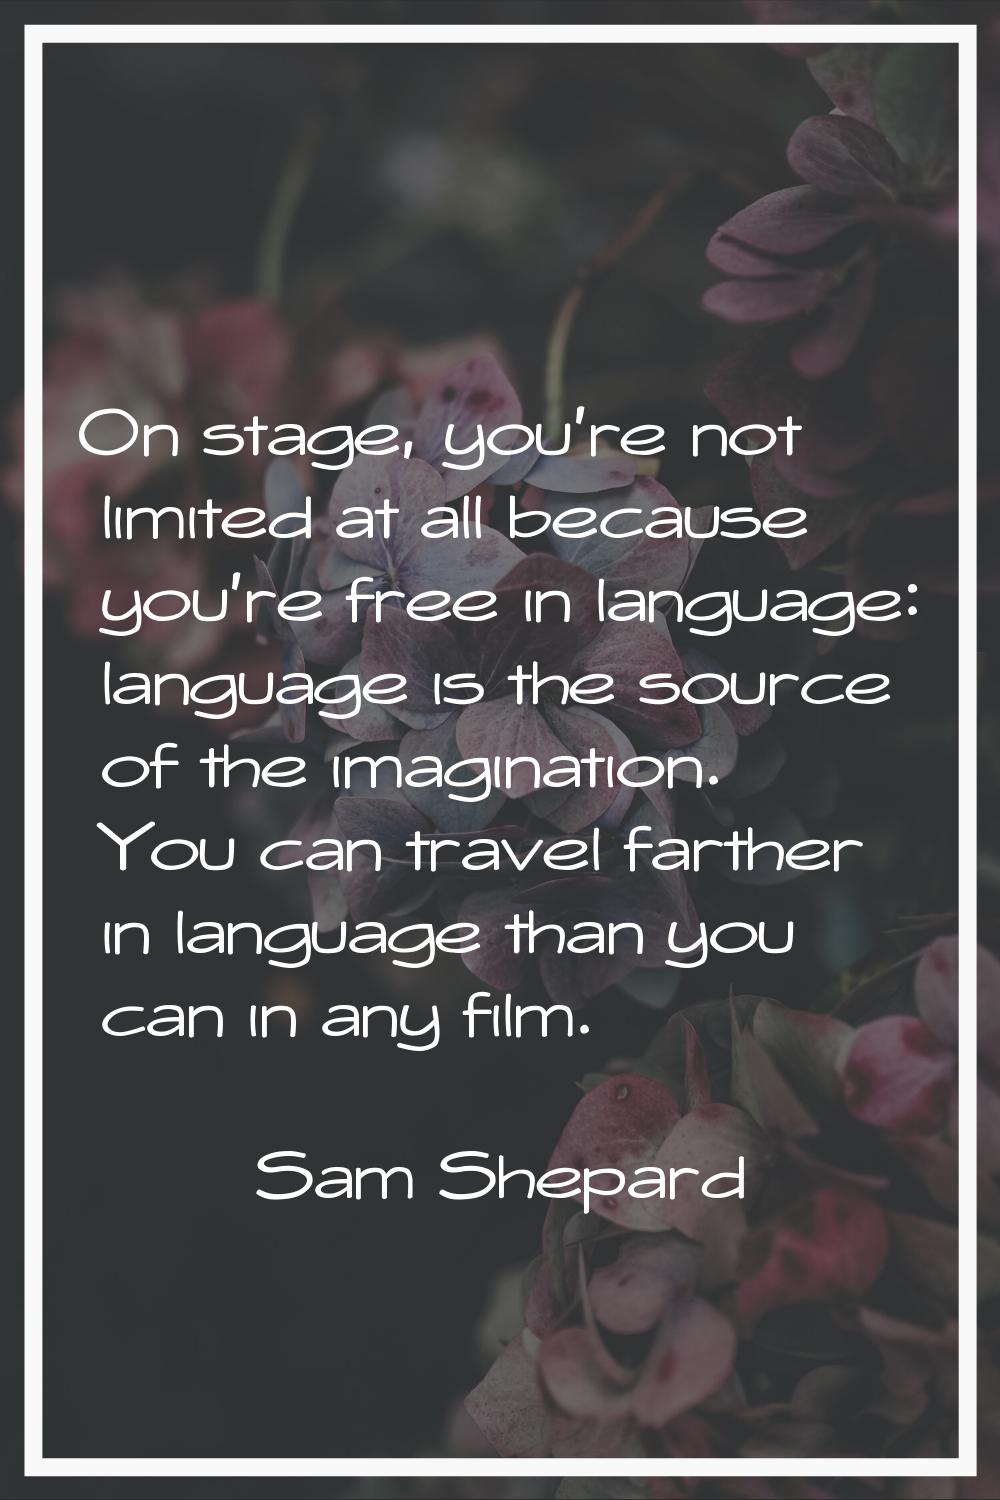 On stage, you're not limited at all because you're free in language: language is the source of the 